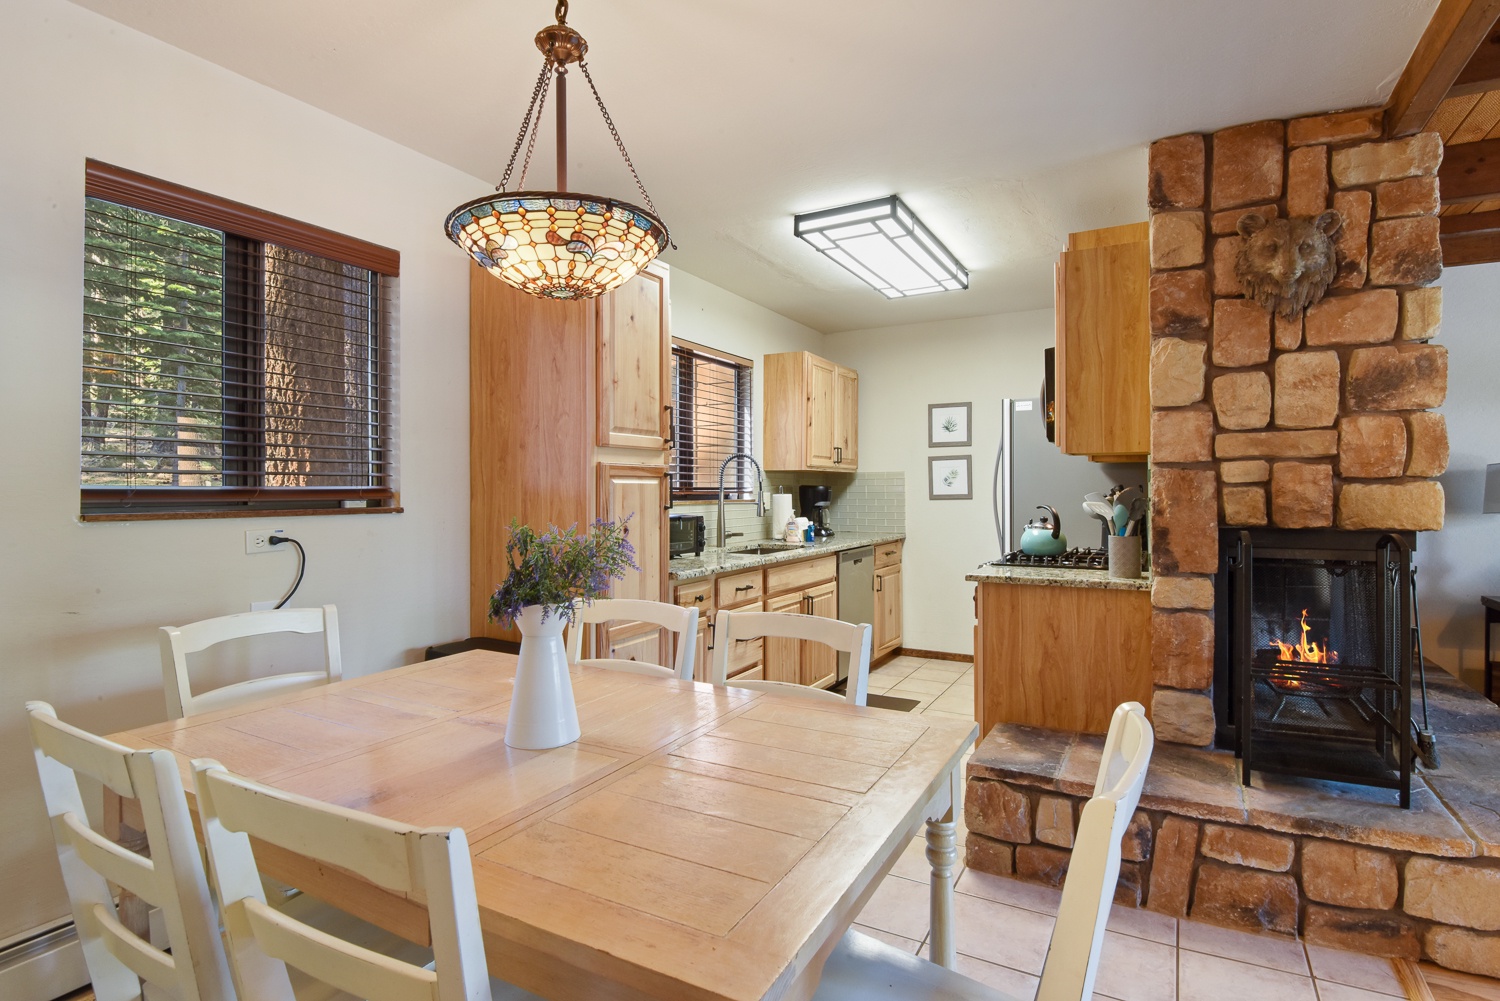 Unit #2: Enjoy meals together at the cozy dining table, with seating for 6